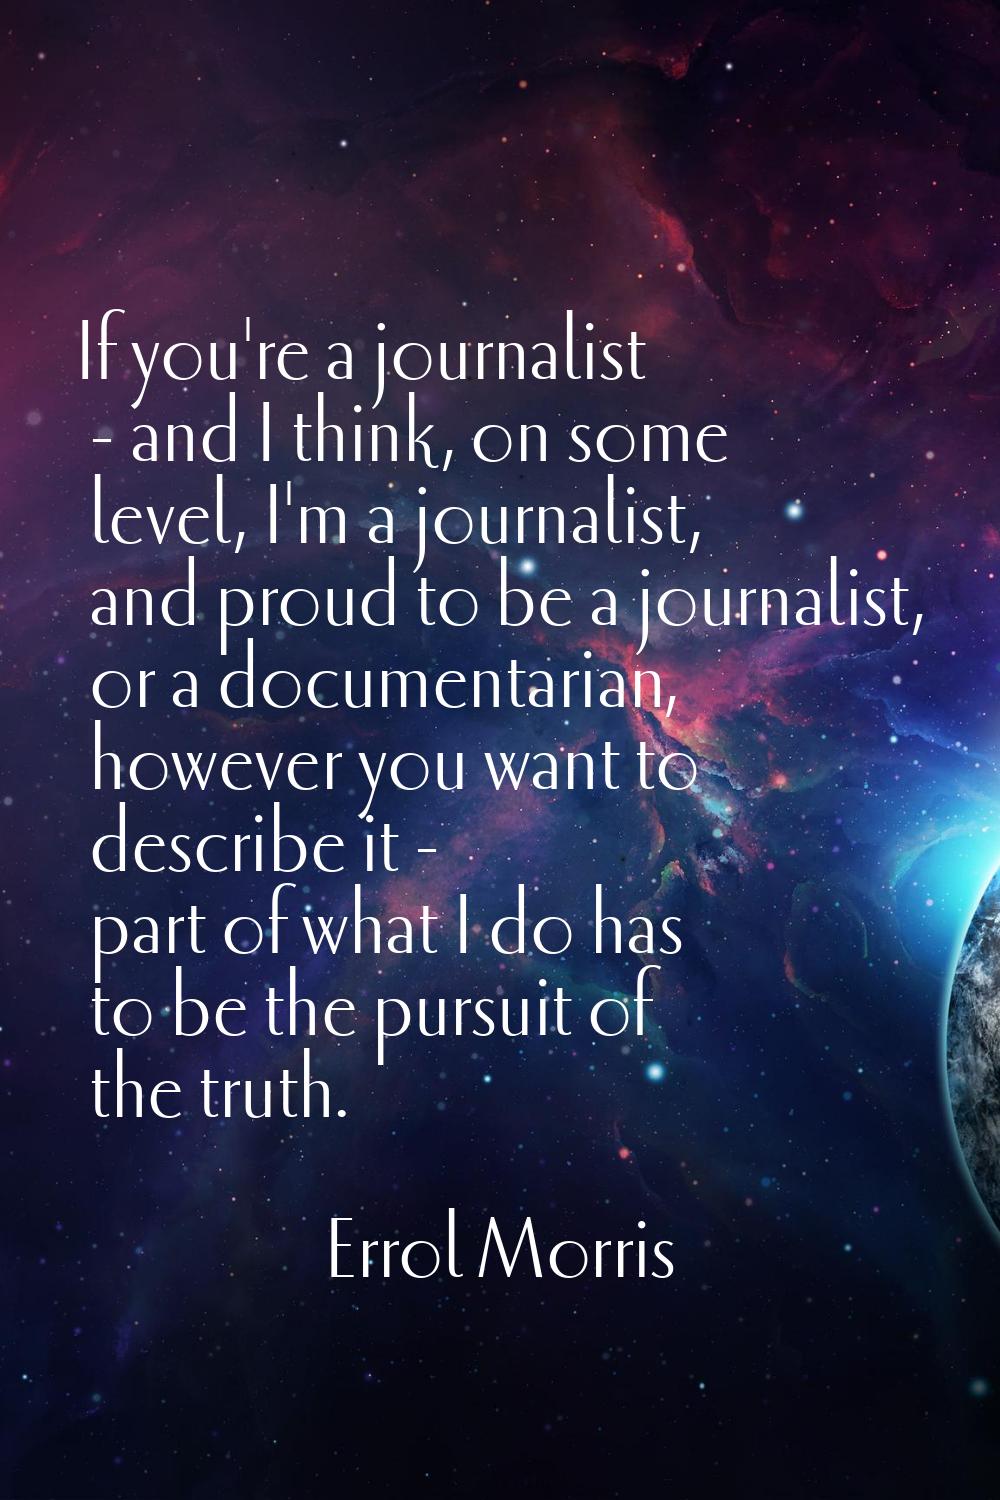 If you're a journalist - and I think, on some level, I'm a journalist, and proud to be a journalist